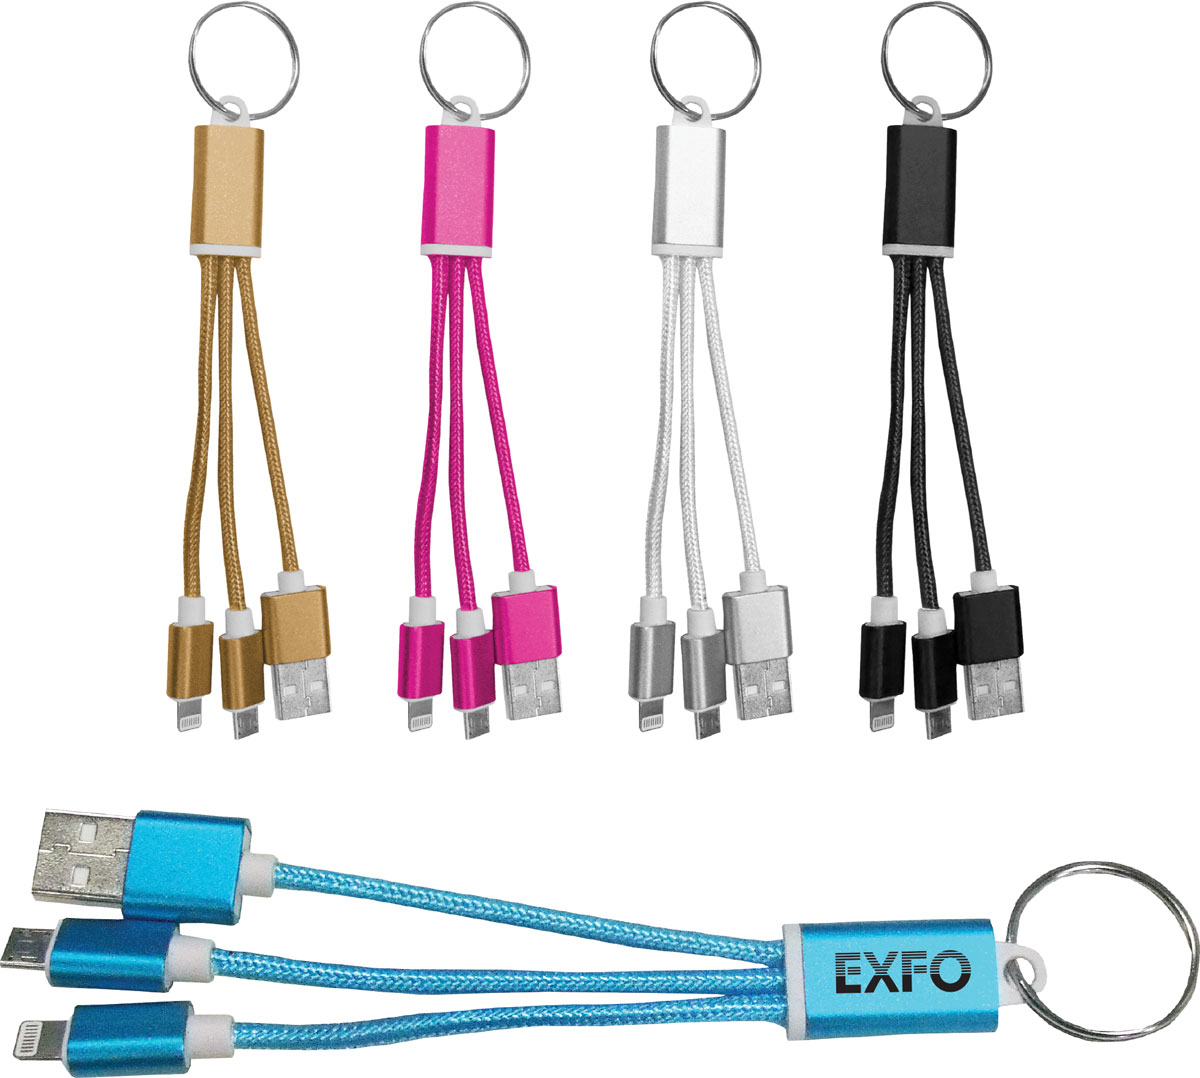 4 in 1 Clip USB Charging Cable